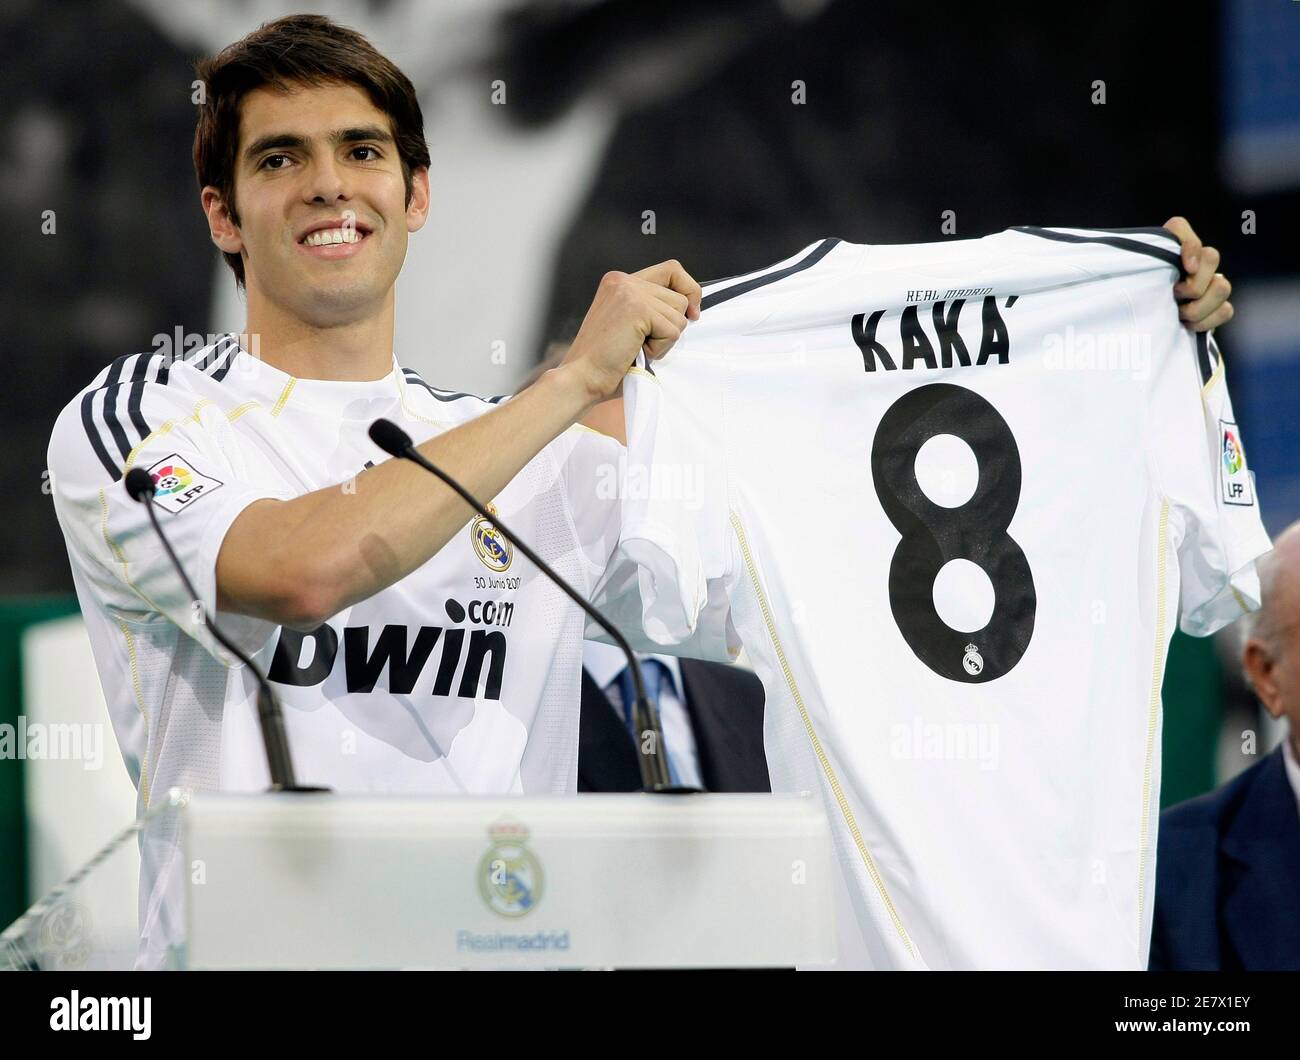 Real Madrid's new Brazilian soccer player Kaka holds his jersey during his  presentation at Santiago Bernabeu stadium in Madrid June 30, 2009.  REUTERS/Juan Medina (SPAIN SPORT SOCCER IMAGES OF THE DAY Stock